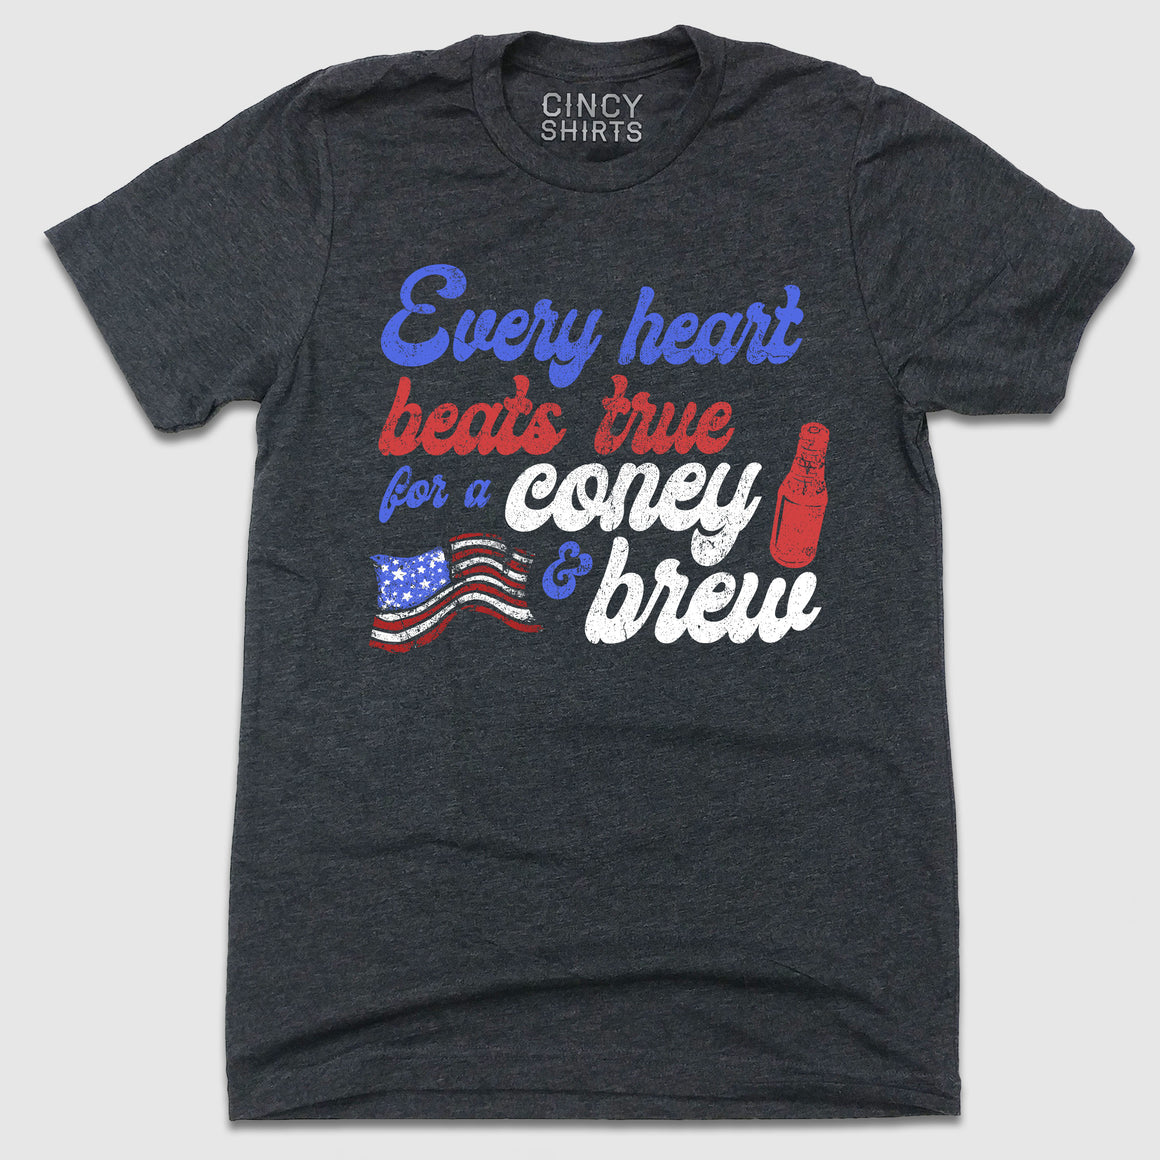 Every Heart Beats True For A Coney & Brew - Cincy Shirts